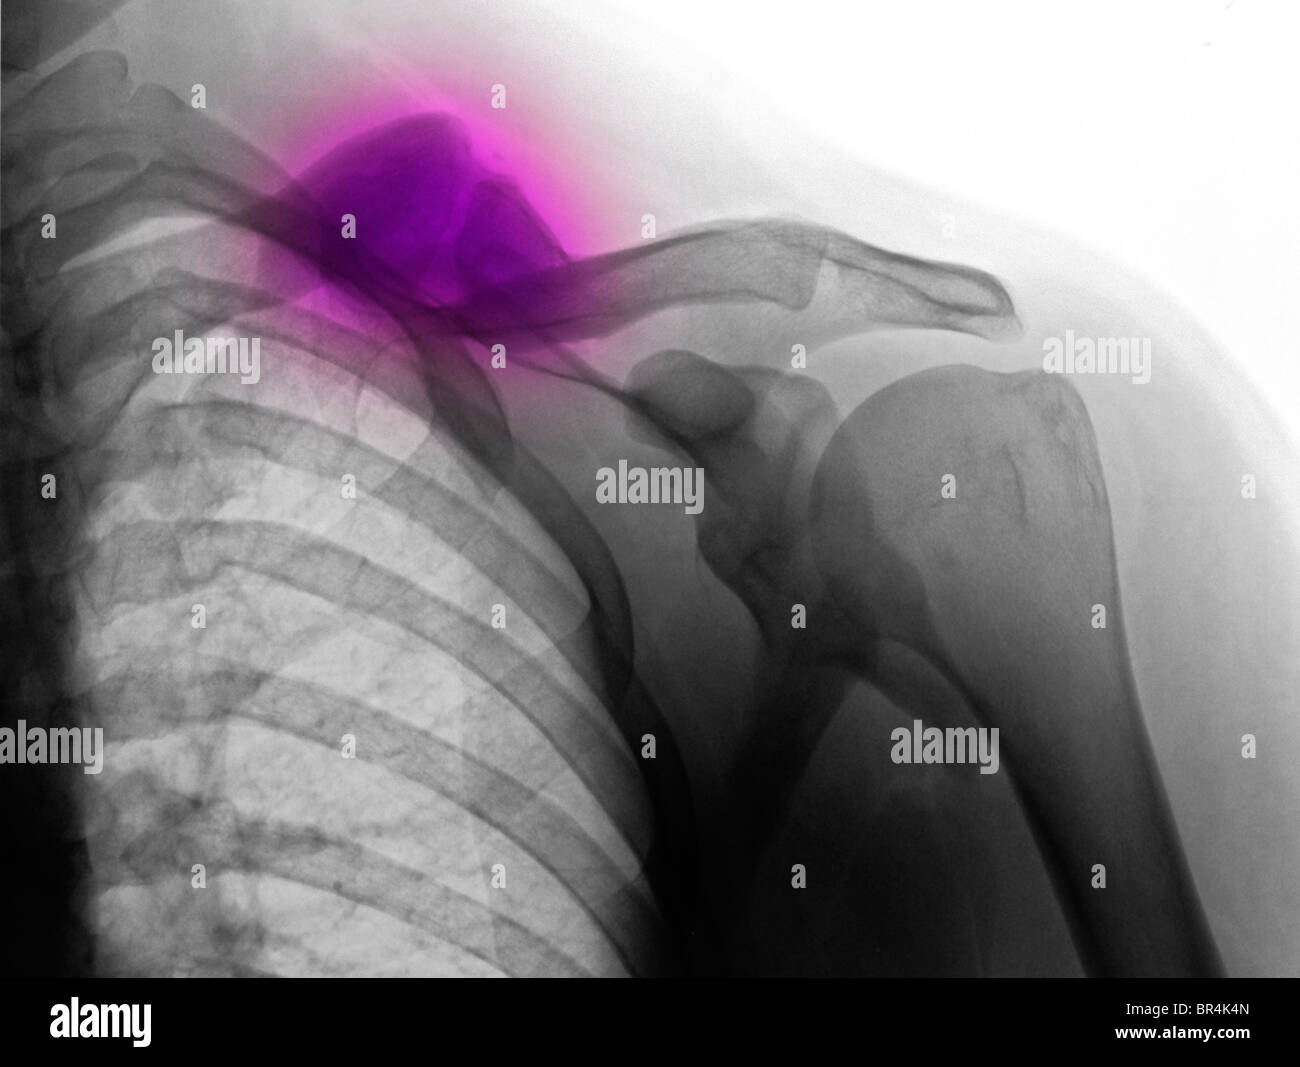 x-ray showing a healed fracture of the collarbone, clavicle, of a 34 year old man Stock Photo